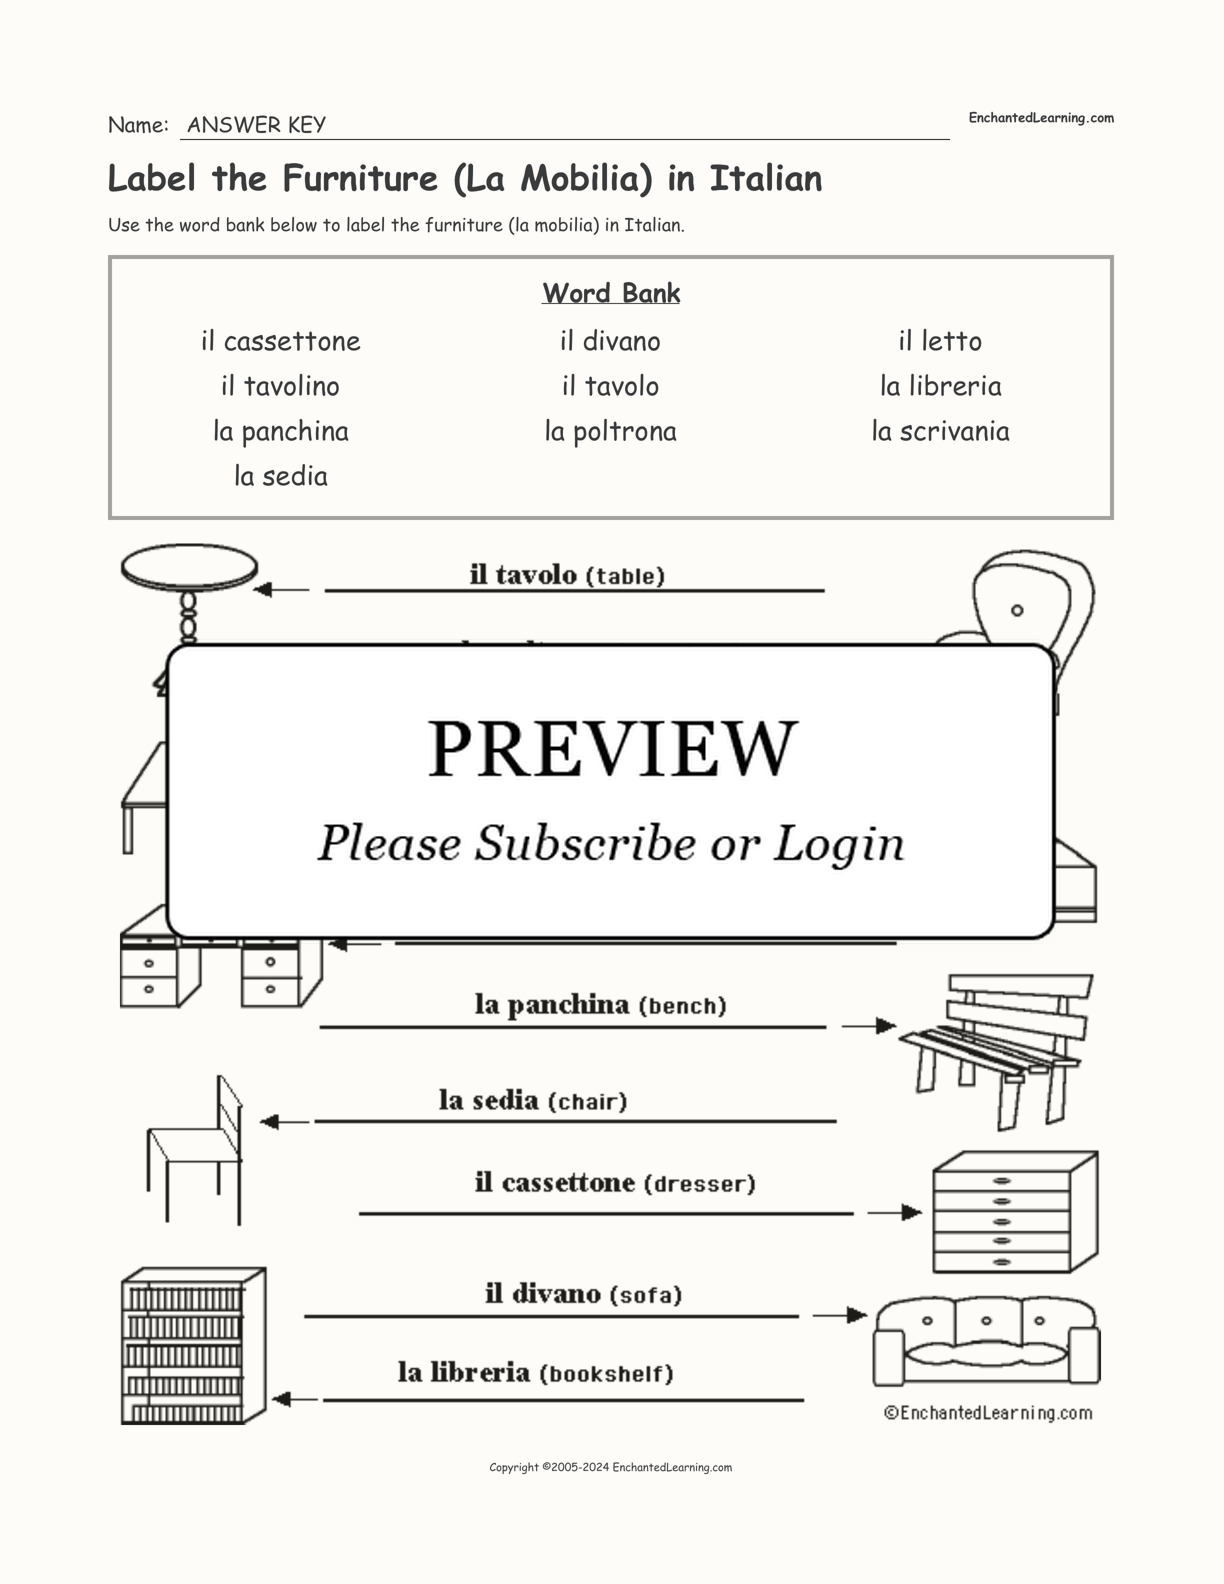 Label the Furniture (La Mobilia) in Italian interactive worksheet page 2